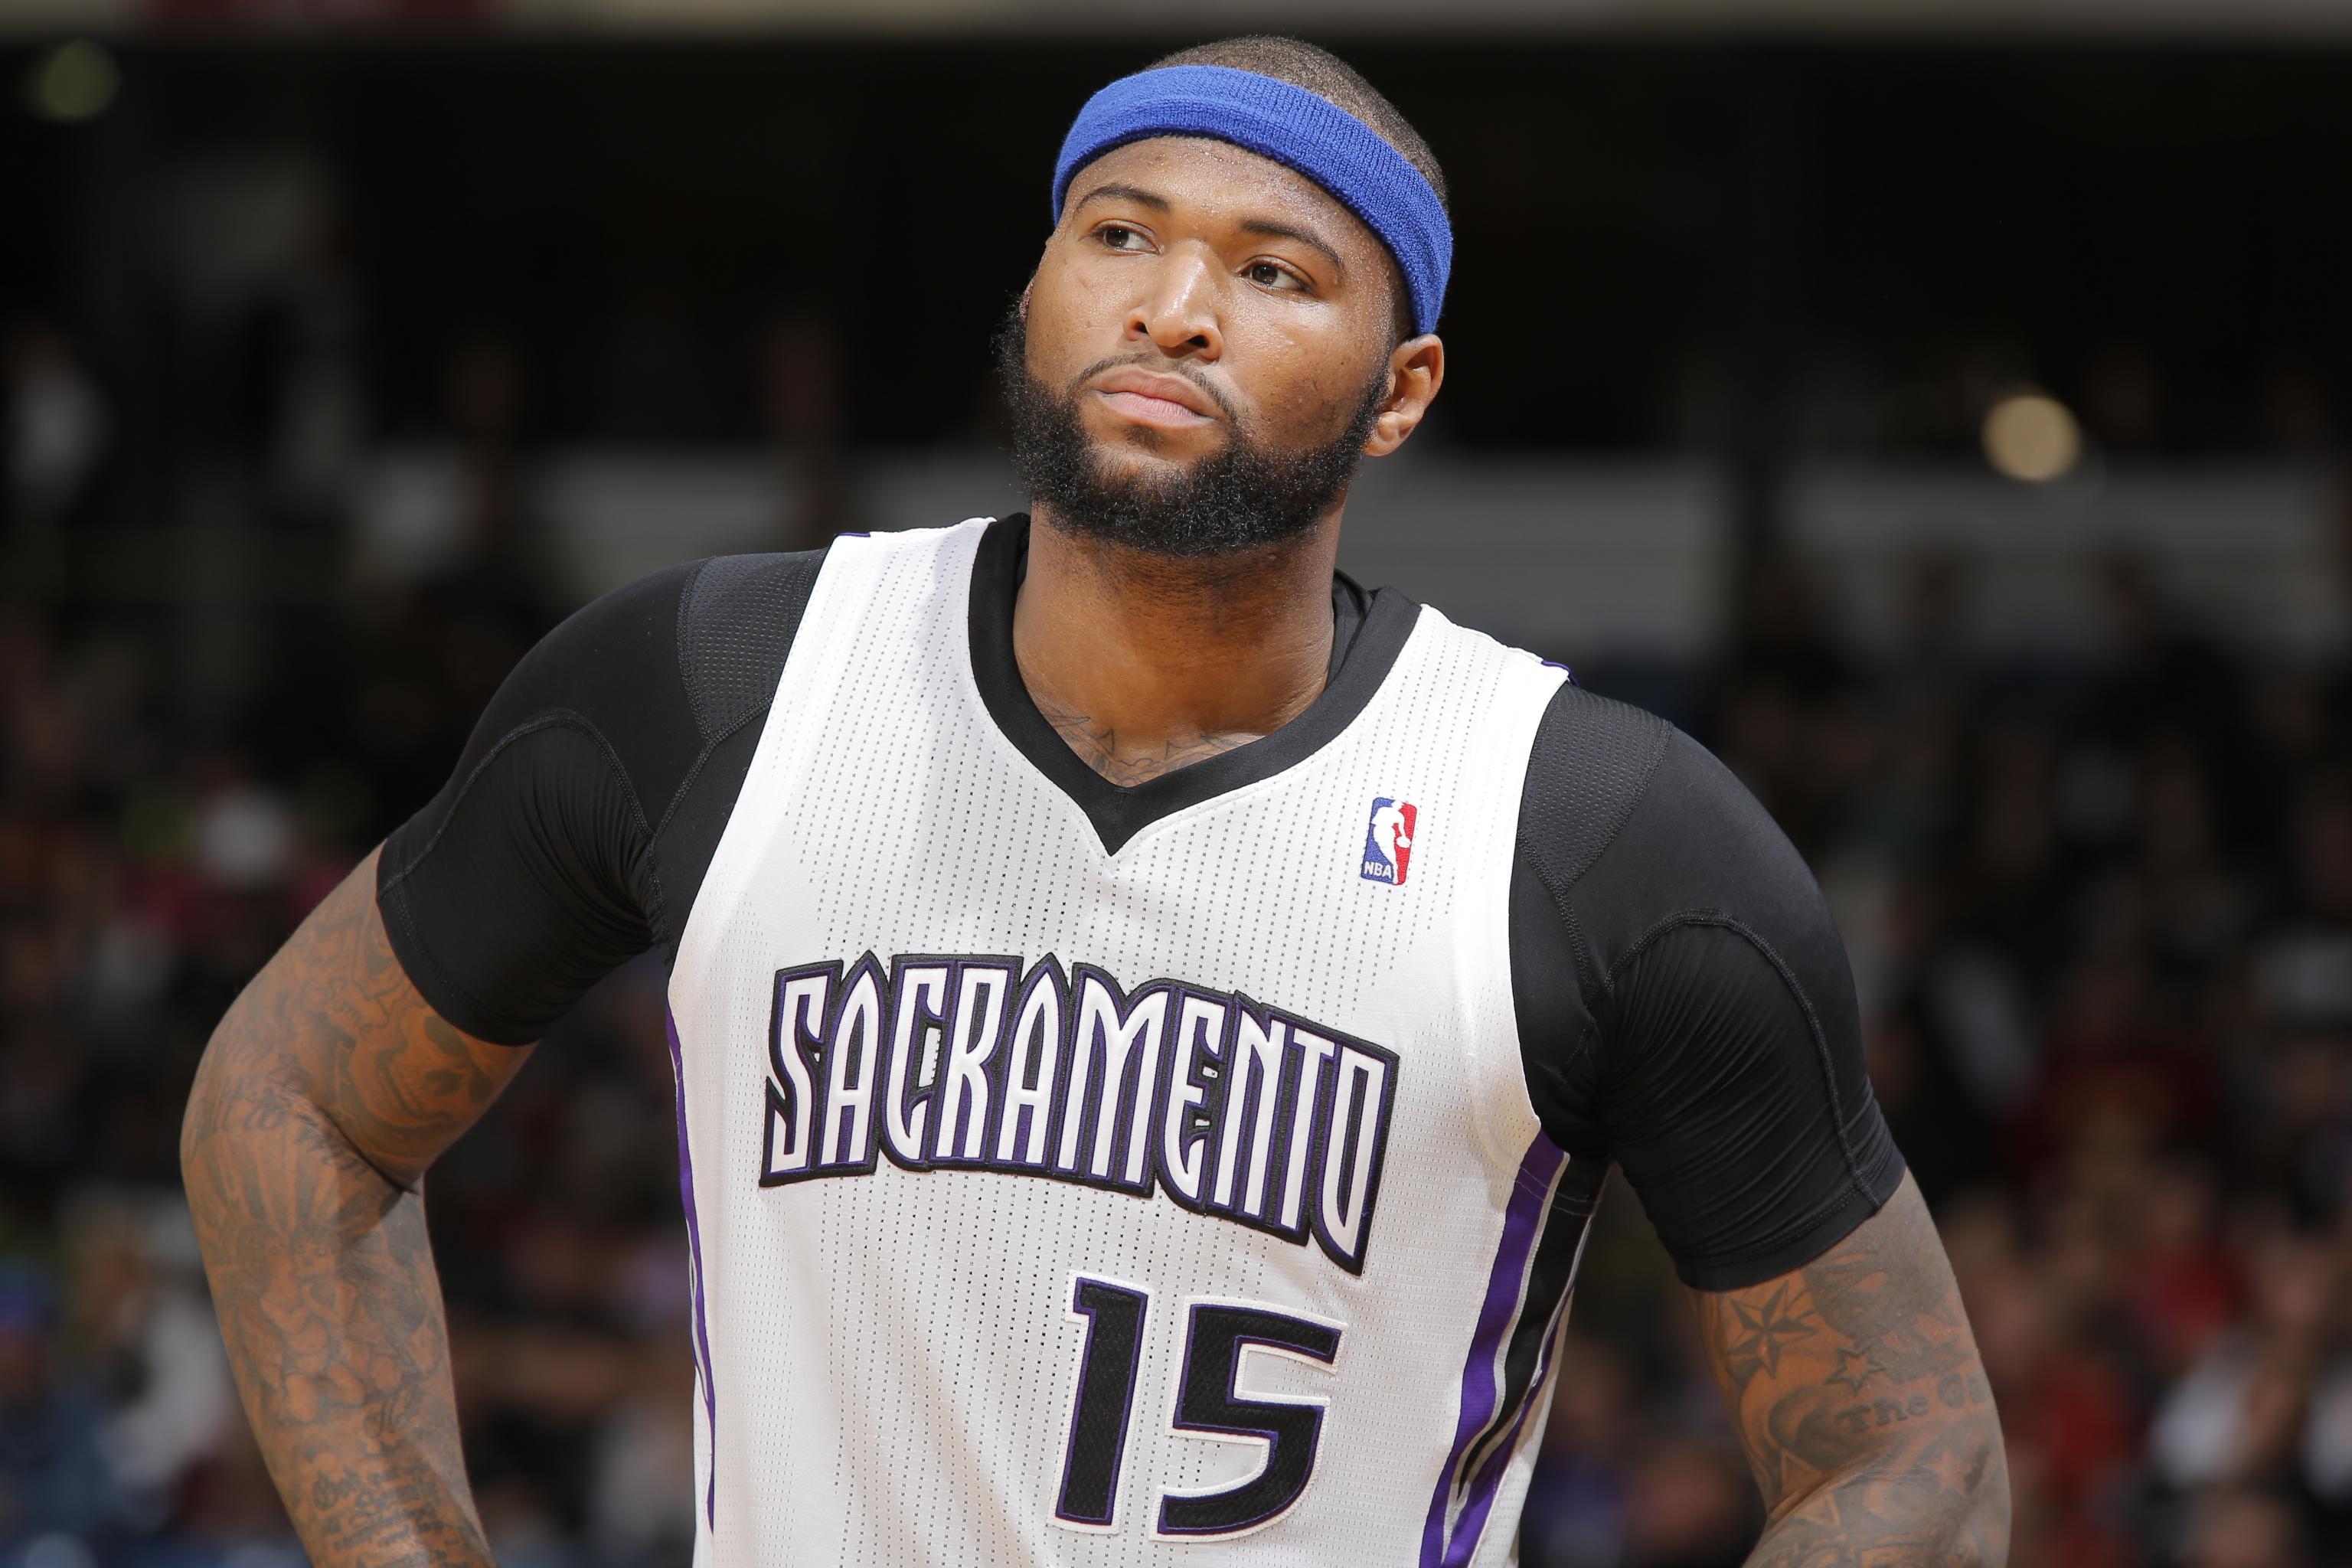 Why DeMarcus Cousins is out of NBA: 'People are afraid